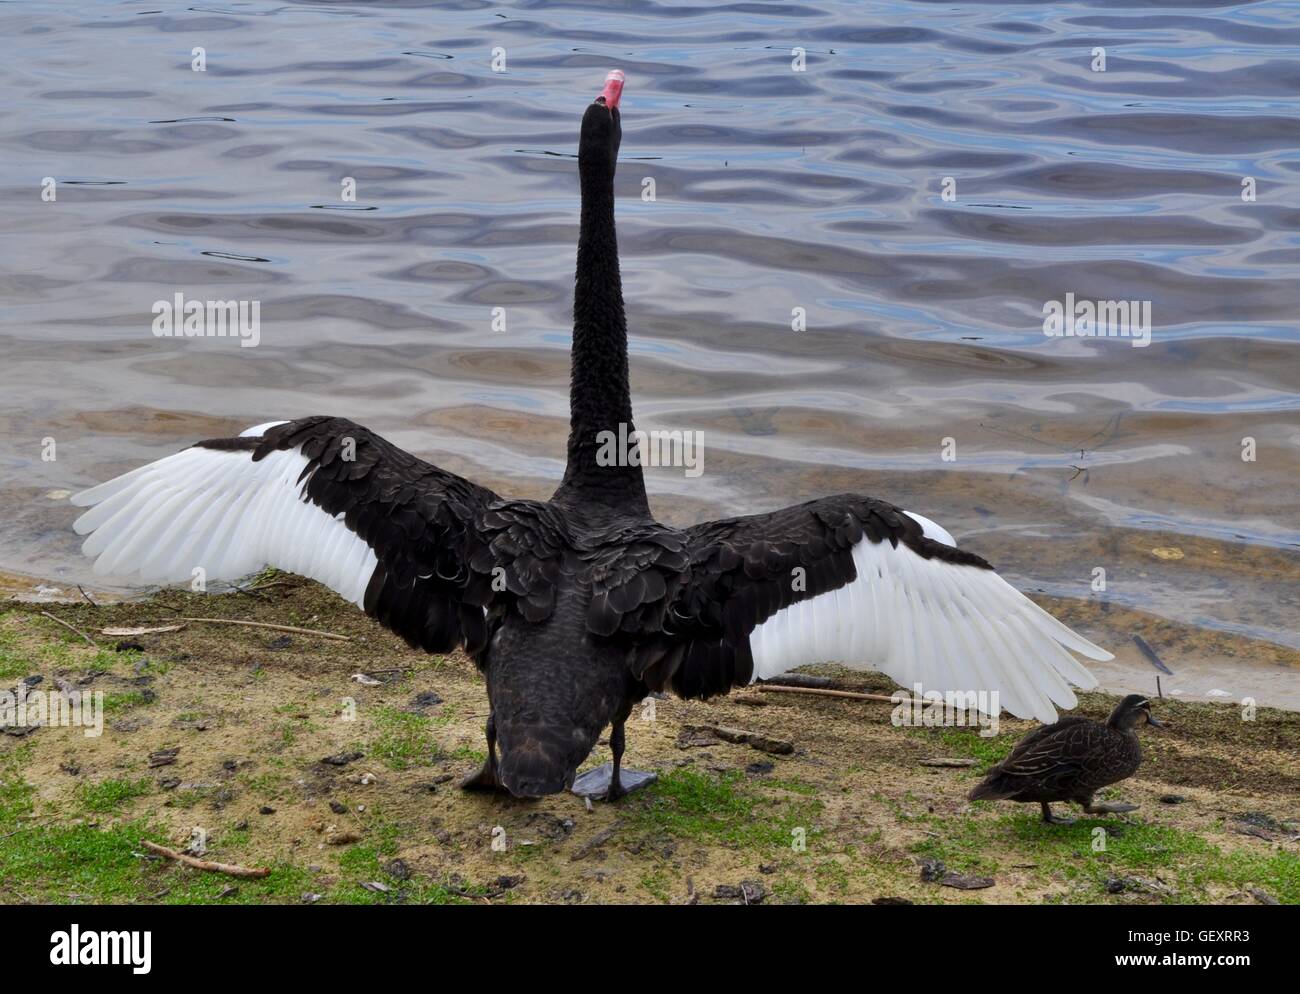 Australian Black Swan with wings outstretched standing at the edge of Bibra Lake with calm water in Western Australia. Stock Photo